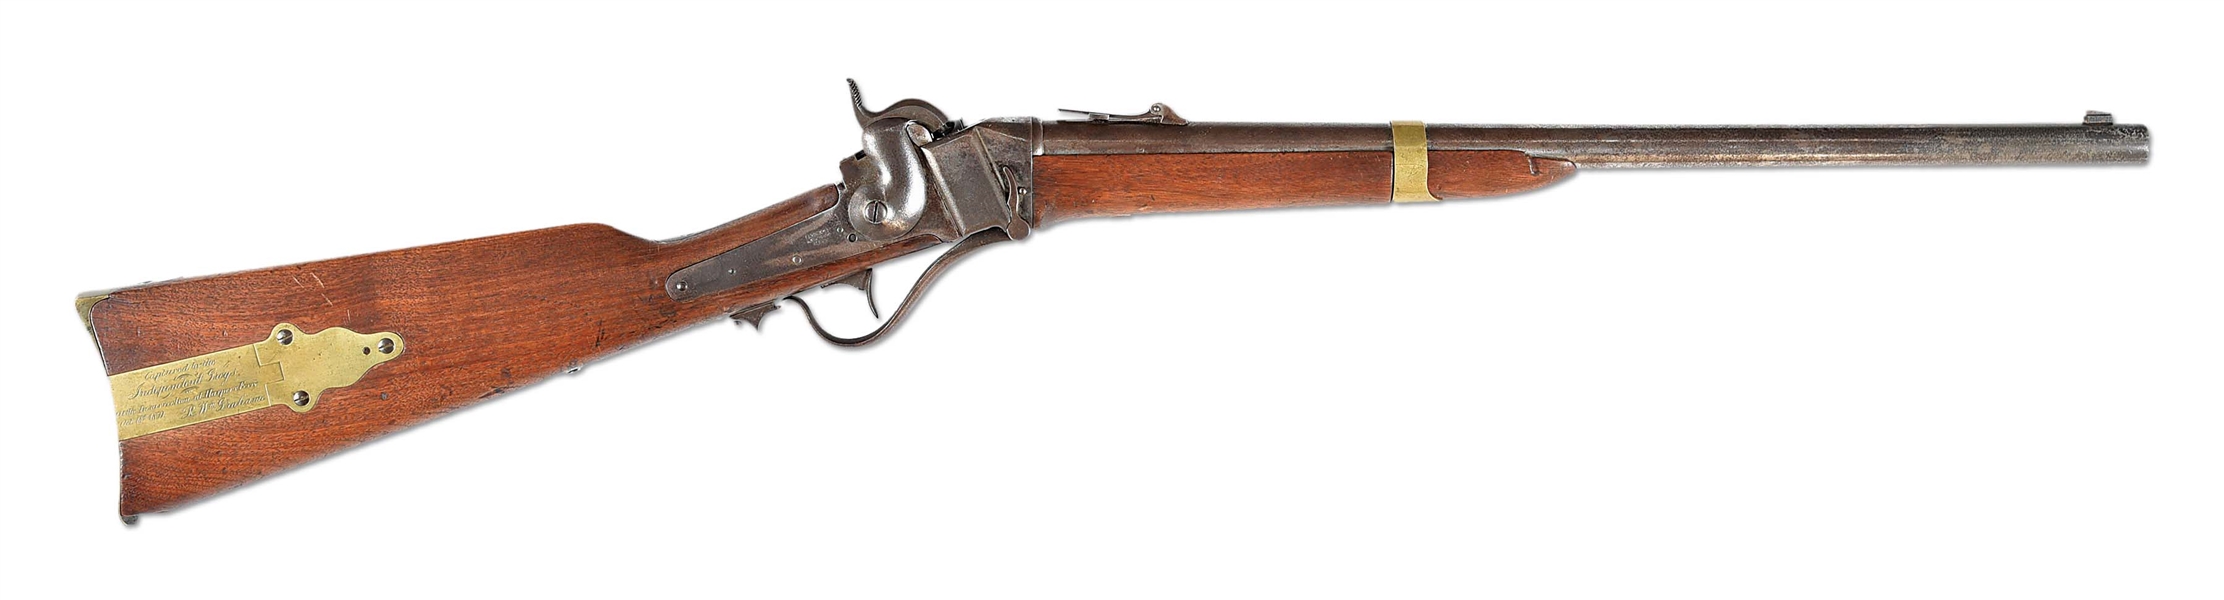 (A) WORLD CLASS SHARPS MODEL 1853 CARBINE TAKEN FROM JOHN BROWN’S ARSENAL AT THE RAID ON HARPERS FERRY BY THE INDEPENDENT GREYS WITH EXCEPTIONAL CAPTURE INSCRIPTION.